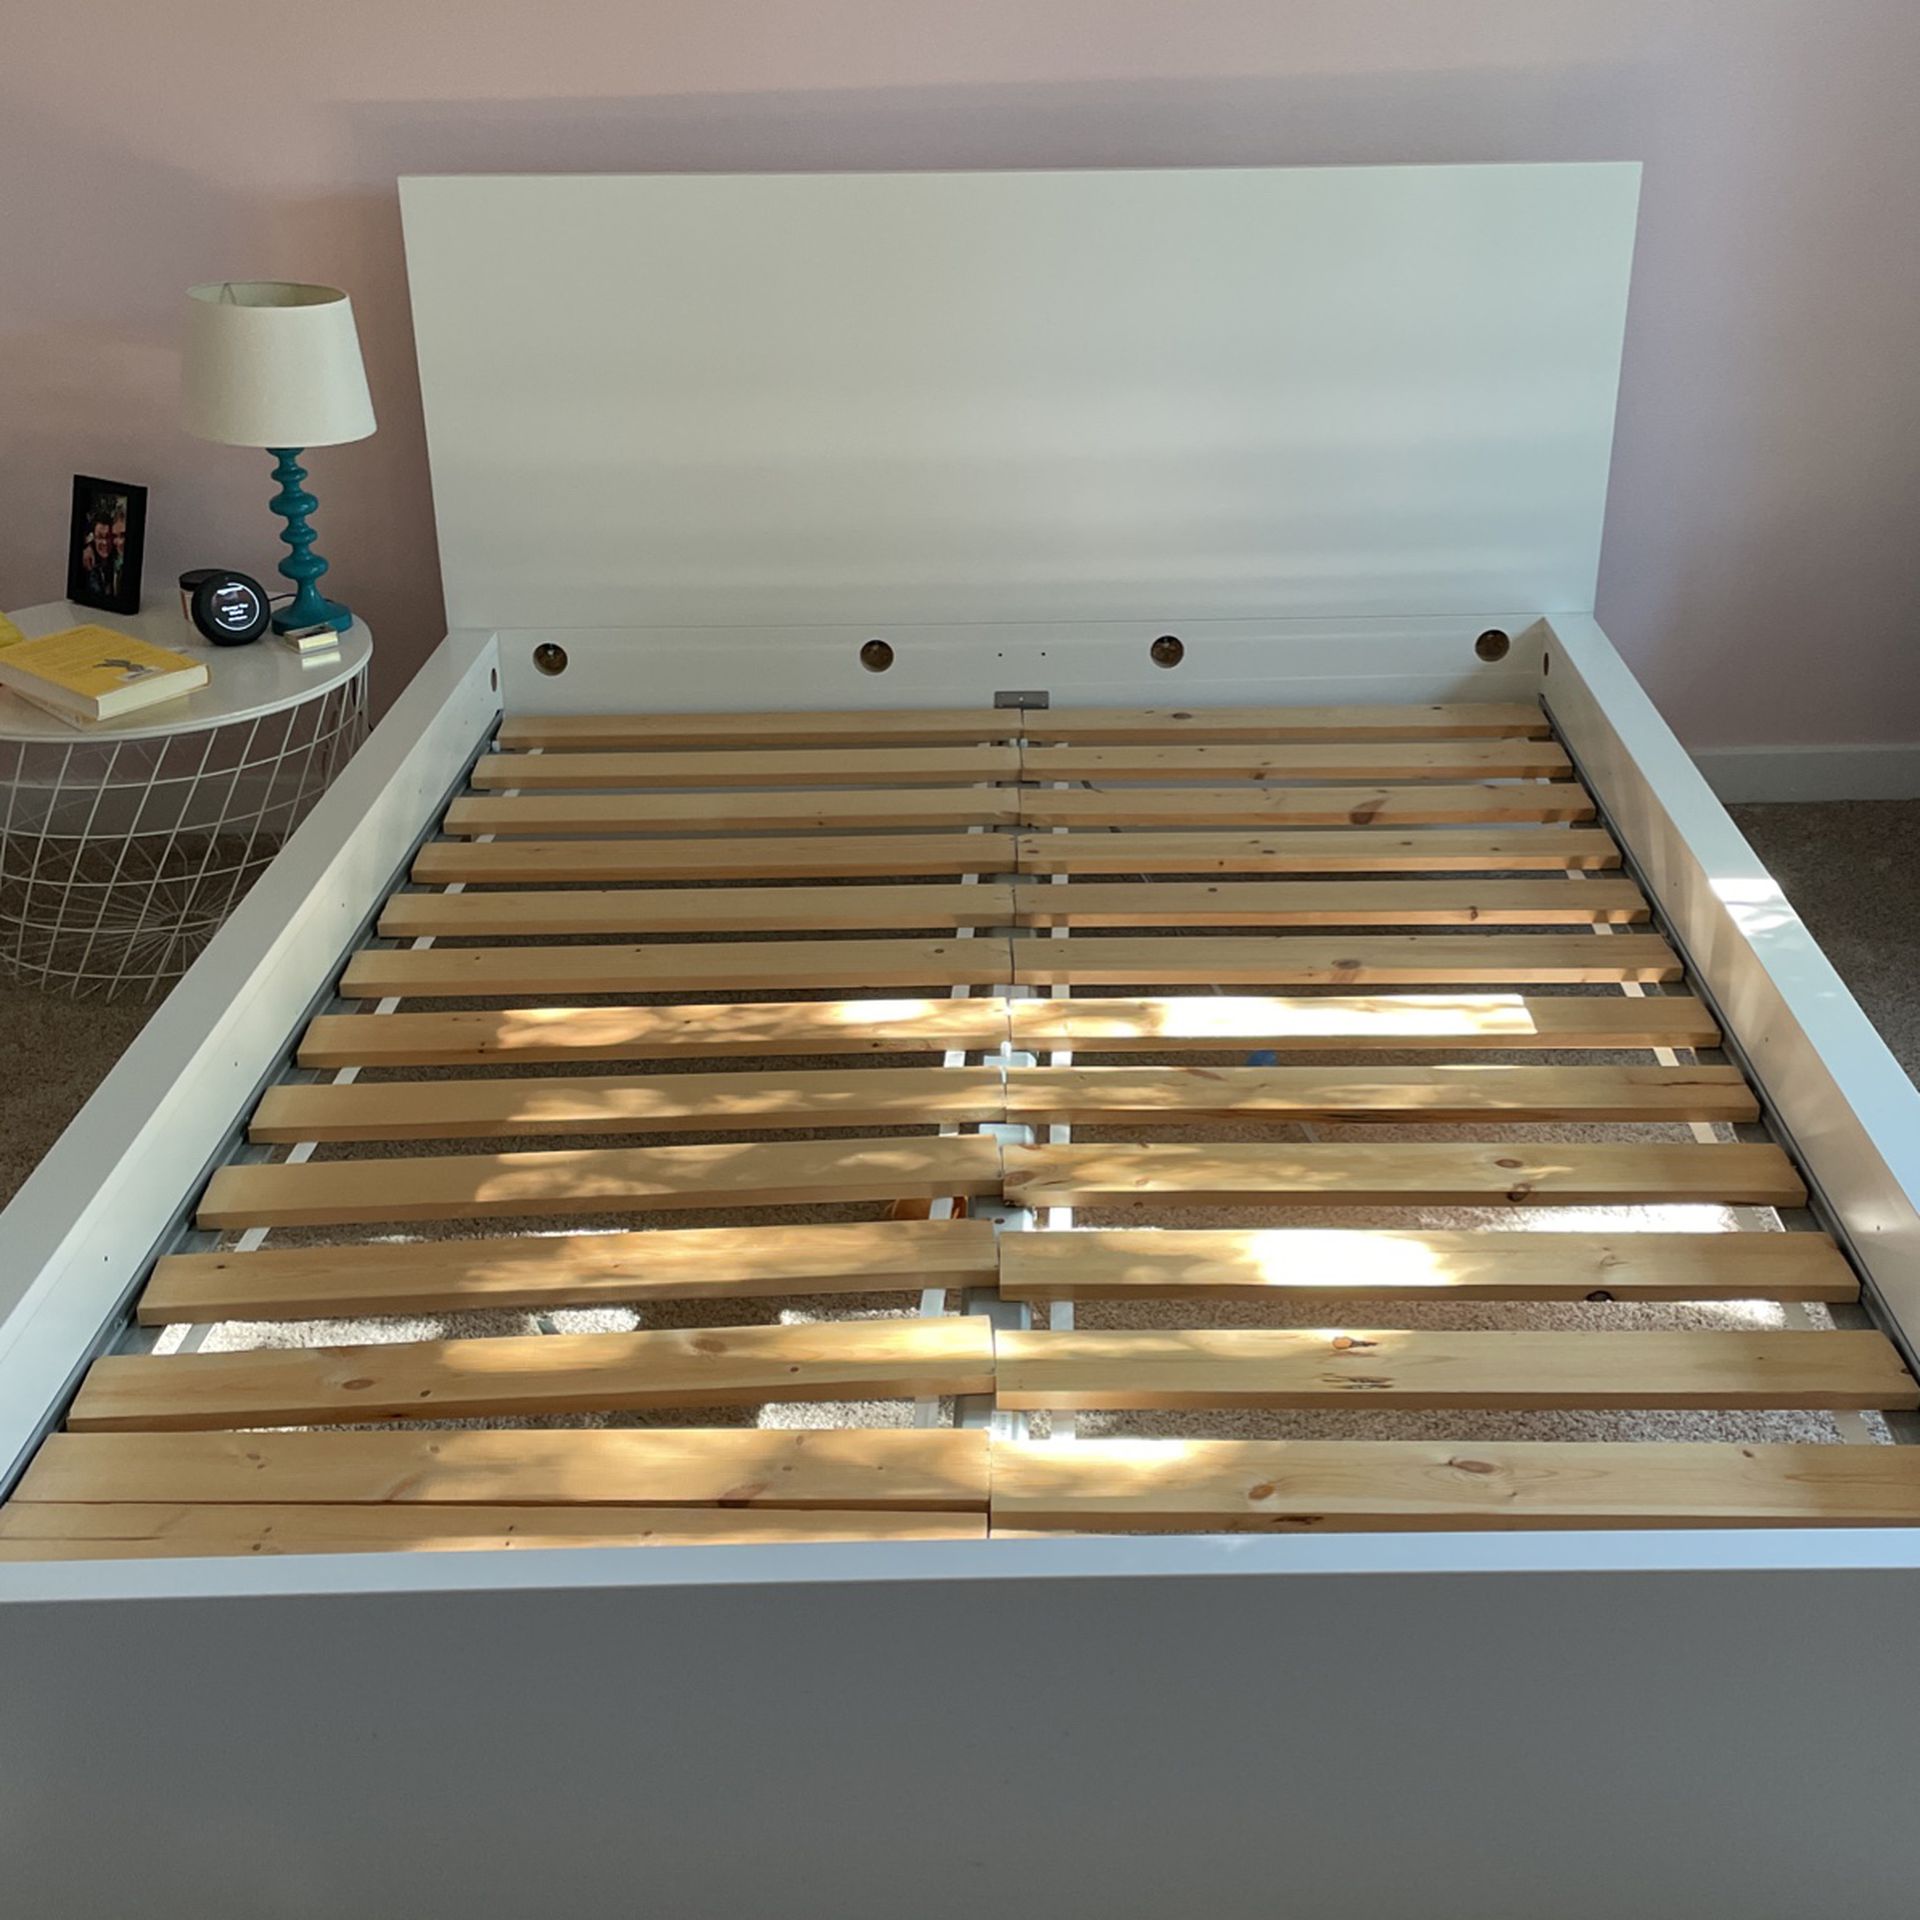 PENDING PICK UP IKEA Malm Queen Size Bed Frame